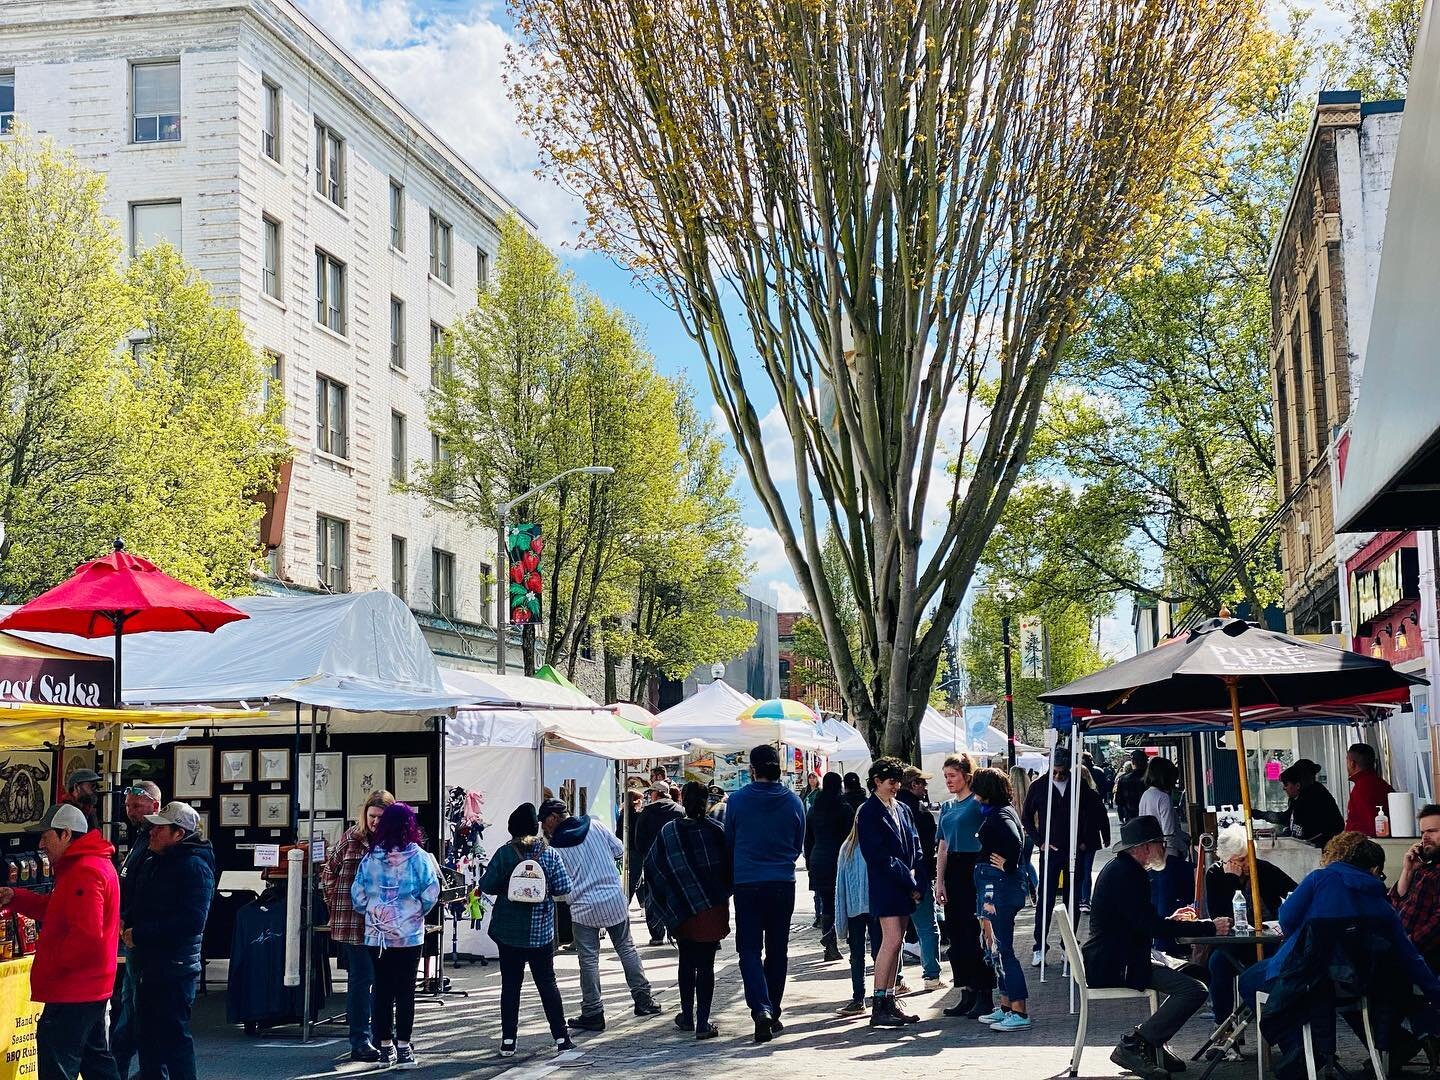 It was a beautiful day today at the Tulip Festival Street Fair! We can&rsquo;t wait for more fun &amp; good weather tomorrow and Sunday! 

Hours:
Saturday 10-6
Sunday 10-5 

@julesthejuggler is here BOTH Days - lots of fun in #downtownmv 🌷

Want mor